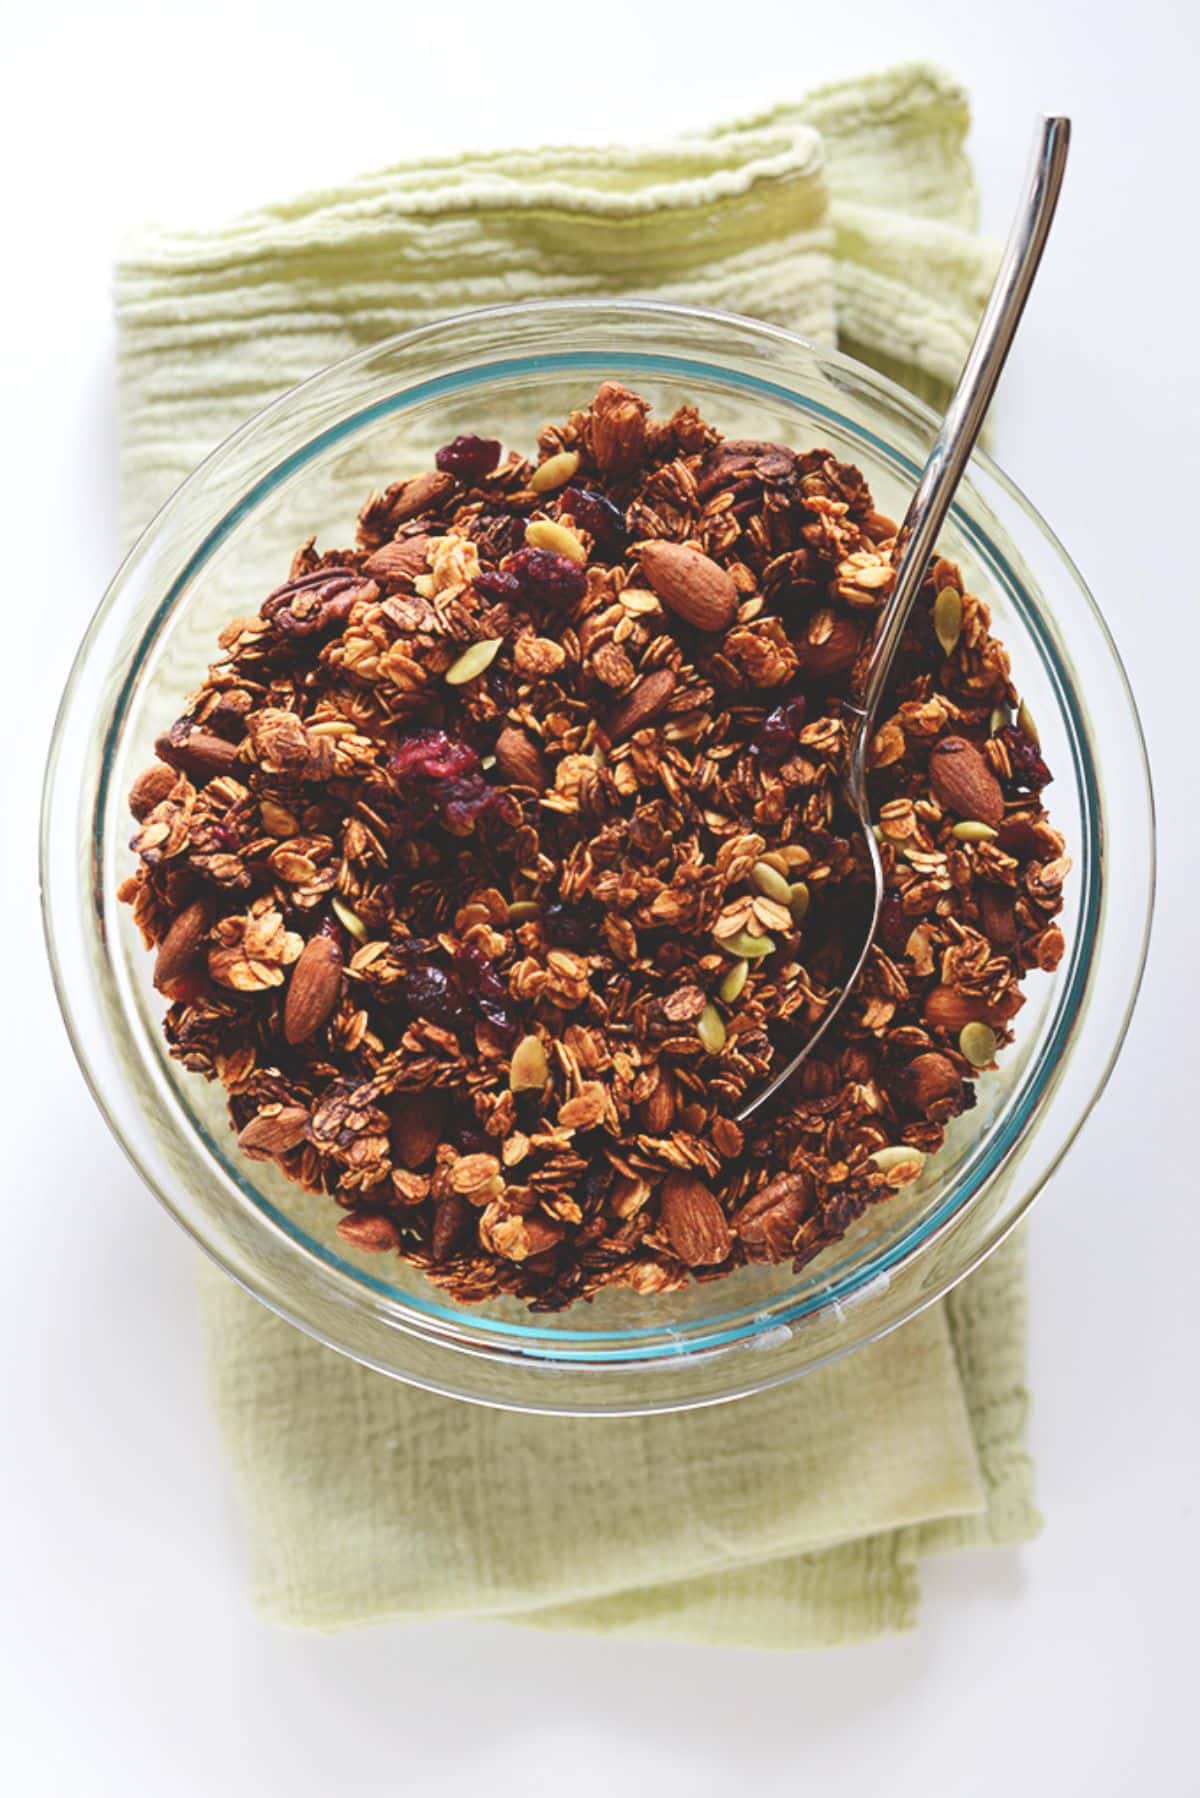 Healthy Sweet Potato Granola in a glass bowl with a spoon.